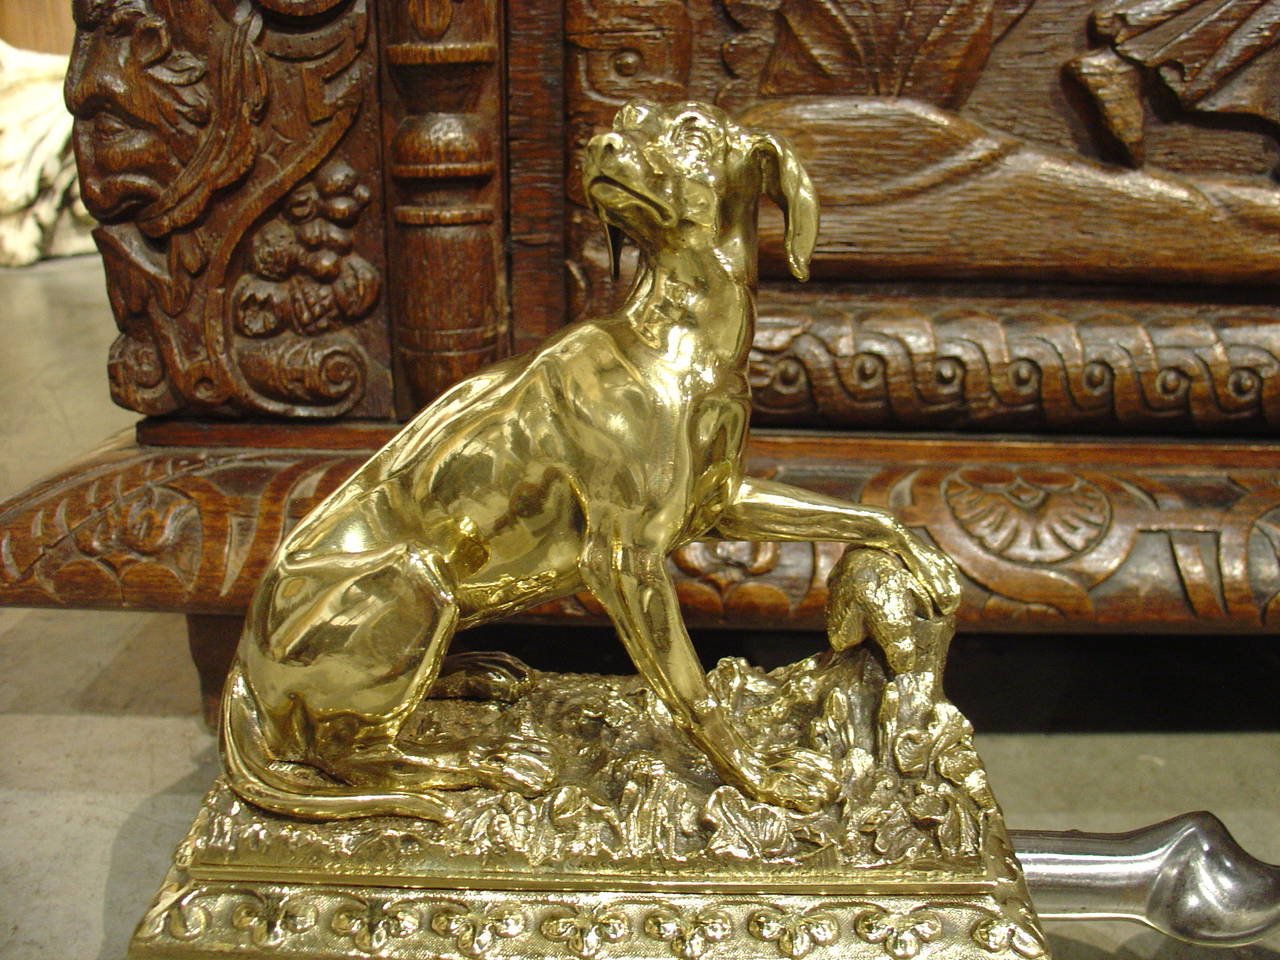 This stunning antique French fireplace fender has been beautifully chased in bronze, brass and polished steel. The dogs are in slightly different seated positions holding down their retrieved trophies with their paws. They are perched atop decorated